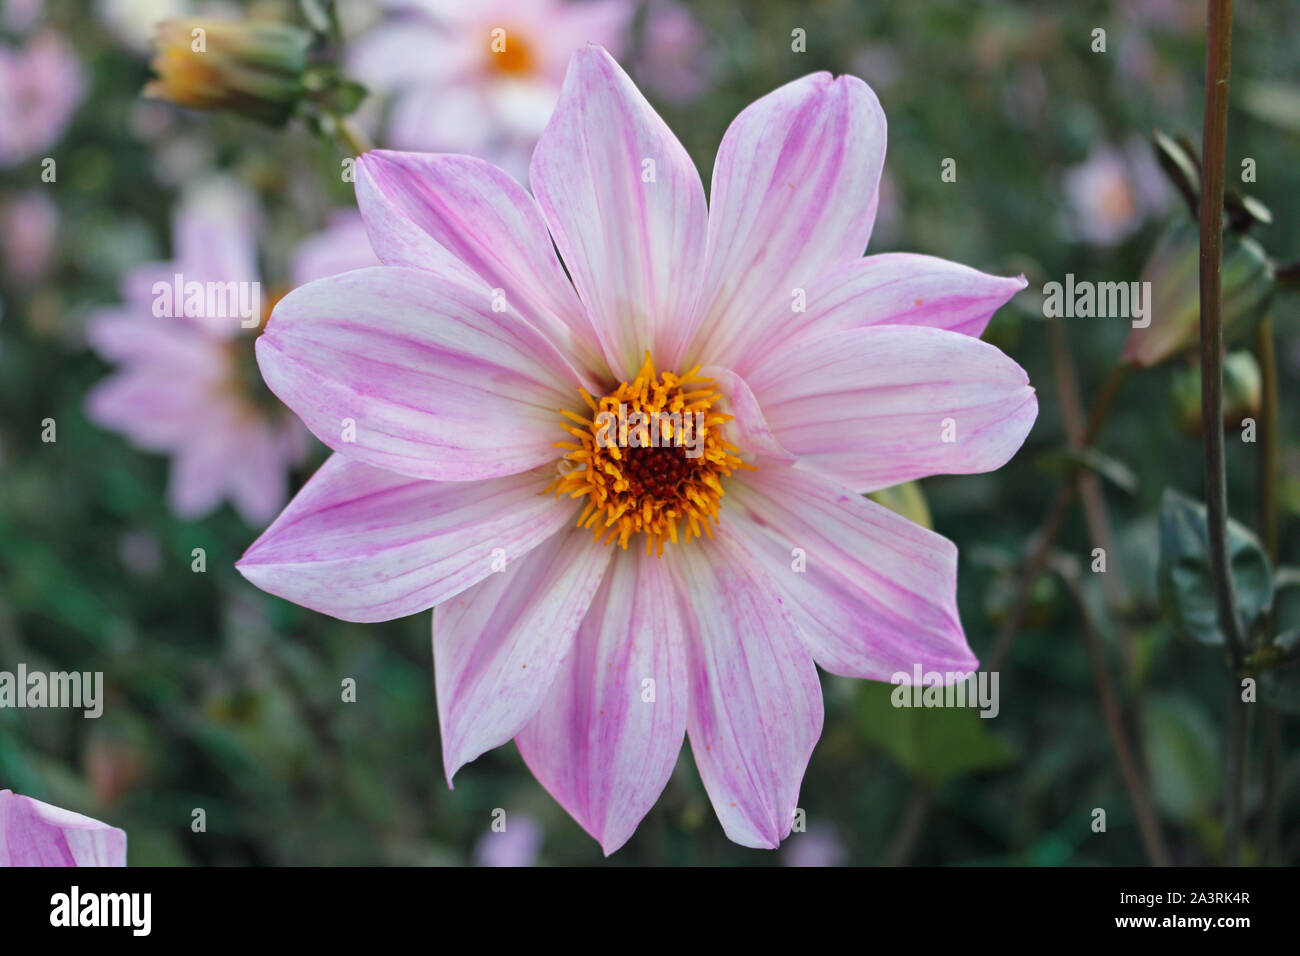 Pink with orange centre dahlia variety Classic Rosamunde flower with a background of blurred dark leaves and flowers. Stock Photo